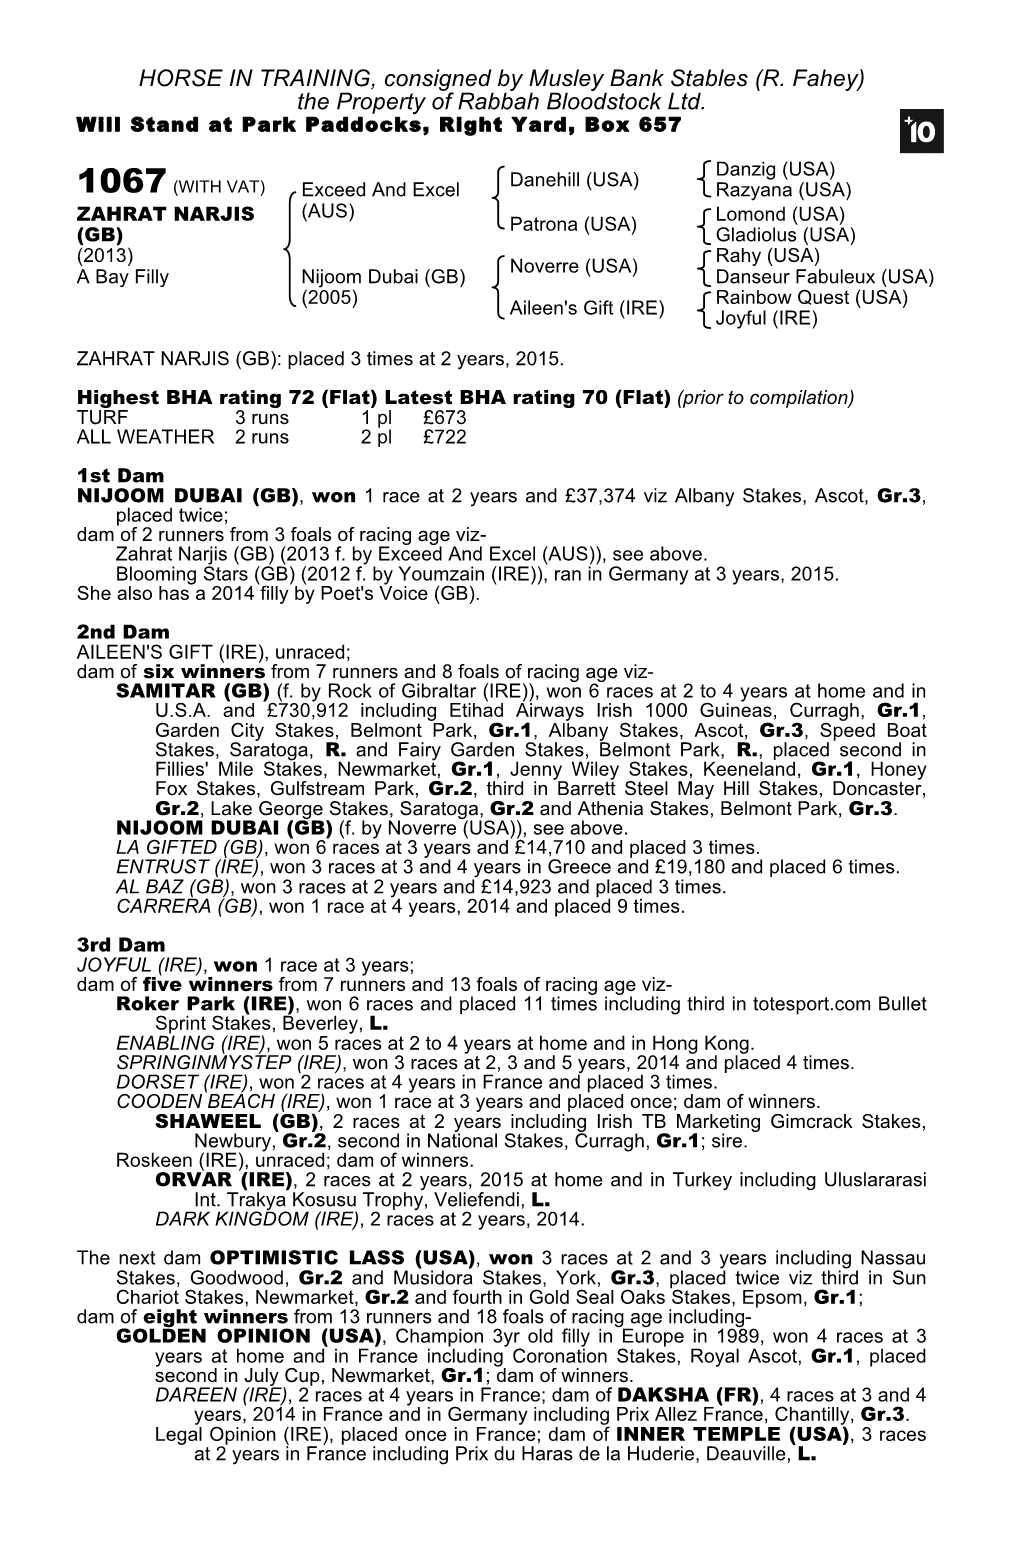 HORSE in TRAINING, Consigned by Musley Bank Stables (R. Fahey) the Property of Rabbah Bloodstock Ltd